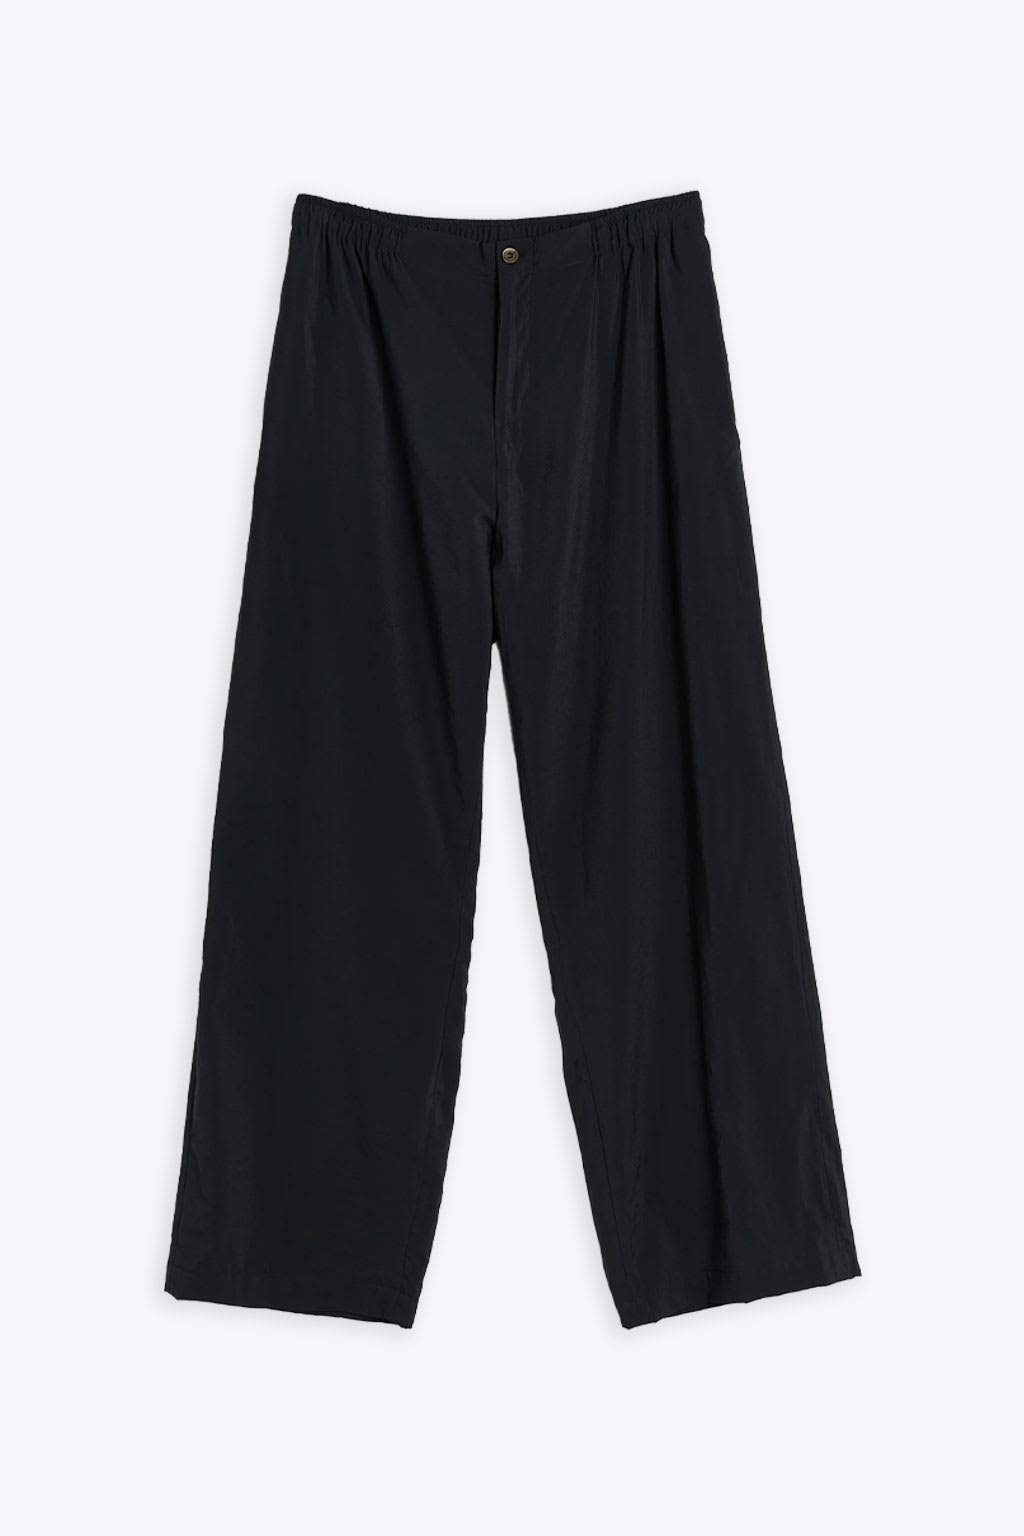 Shop Our Legacy Luft Trouser Black Liquid Viscose Drawstring Pant - Luft Trouser In Nero